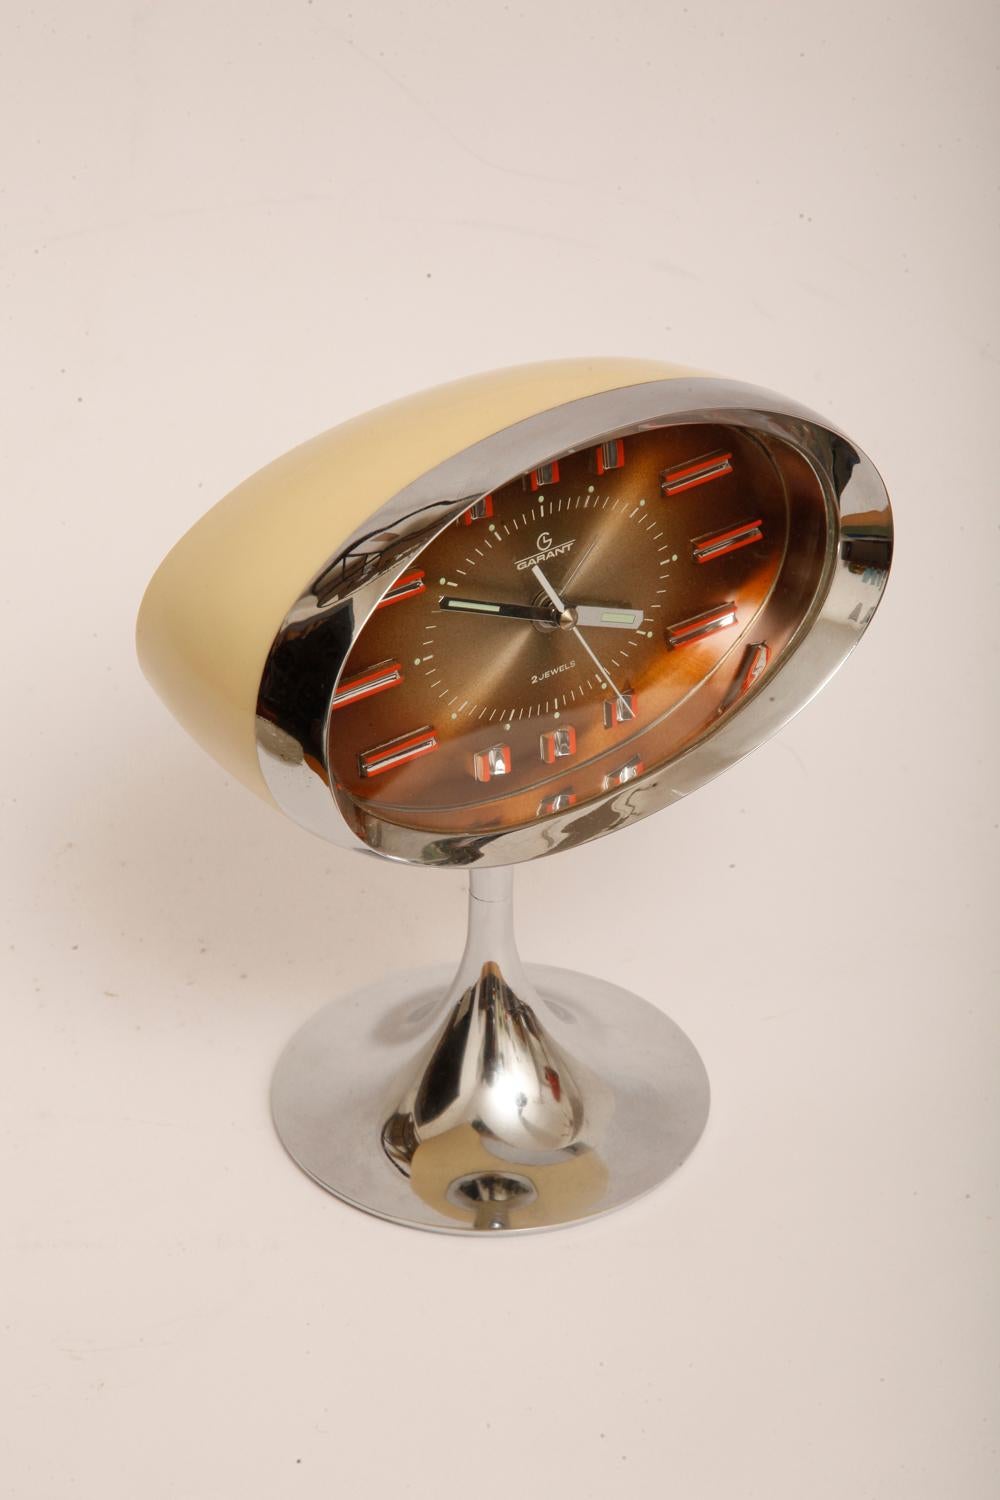 Late 20th Century Japanese Space Age Alarm Clock Garant, Plastic and Chromed, 1970s For Sale